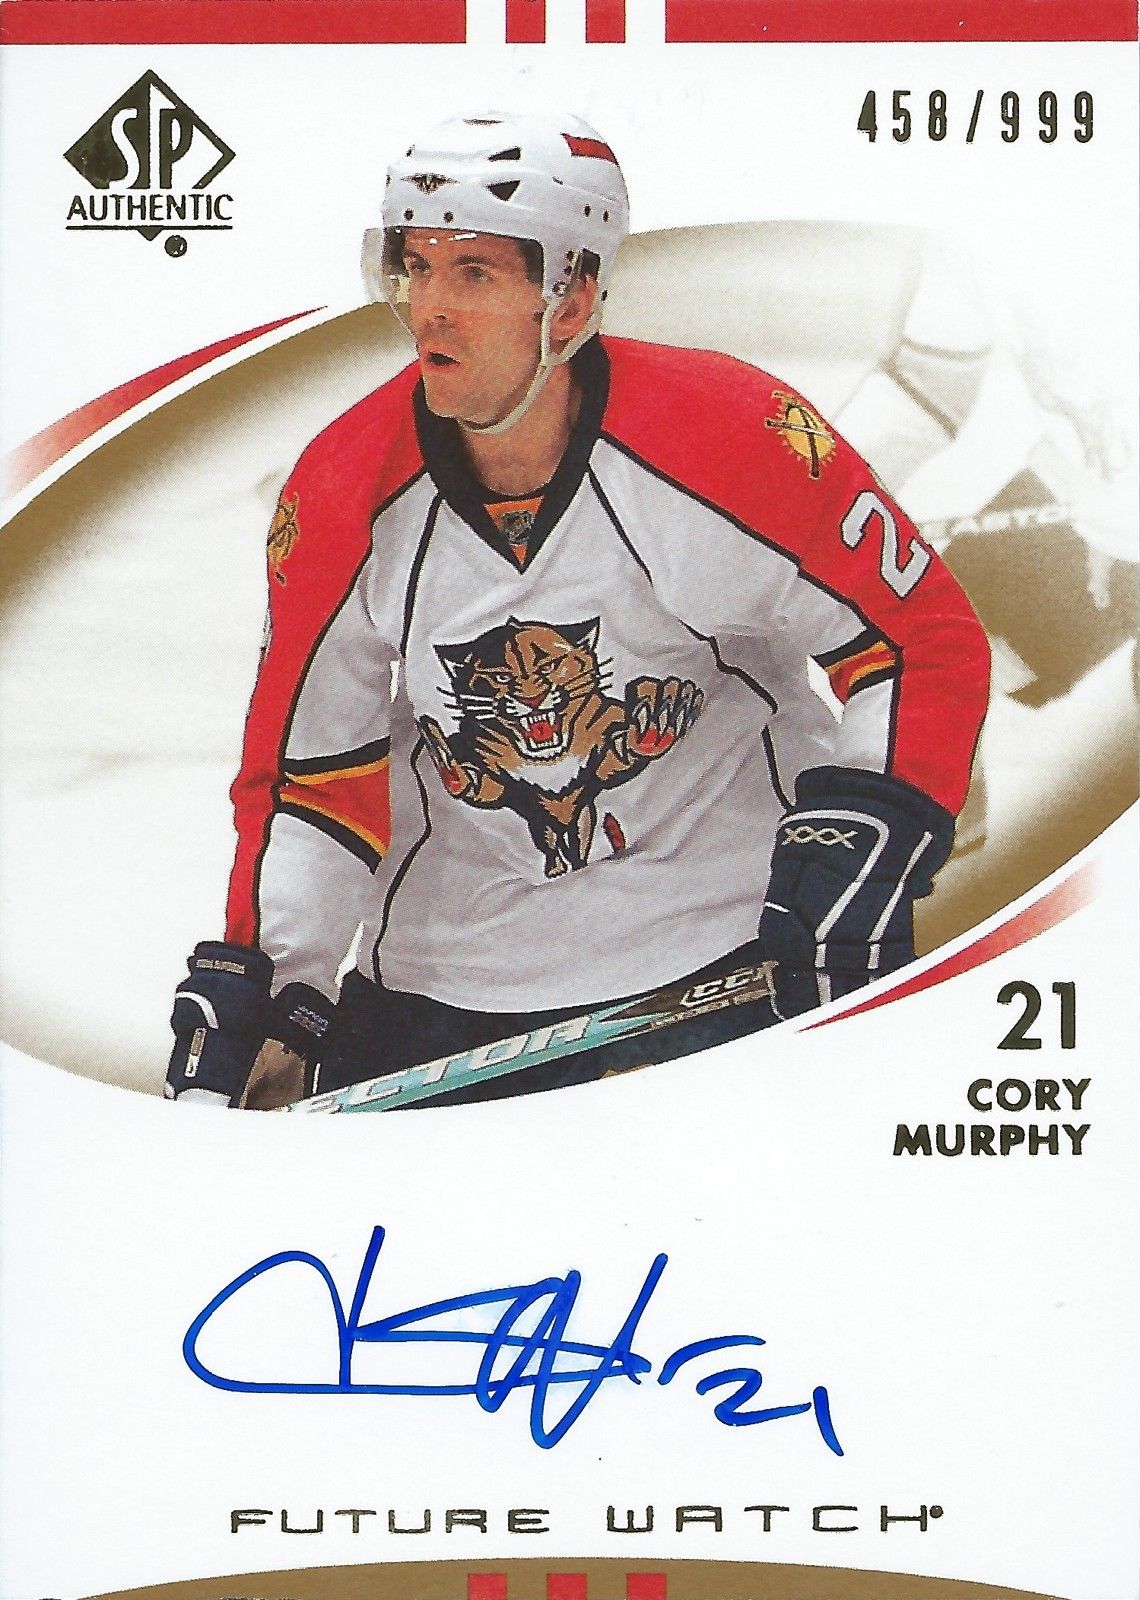  2007-08 SP Authentic CORY MURPHY Auto/RC 458/999 Future Rookie  00026 Image 1